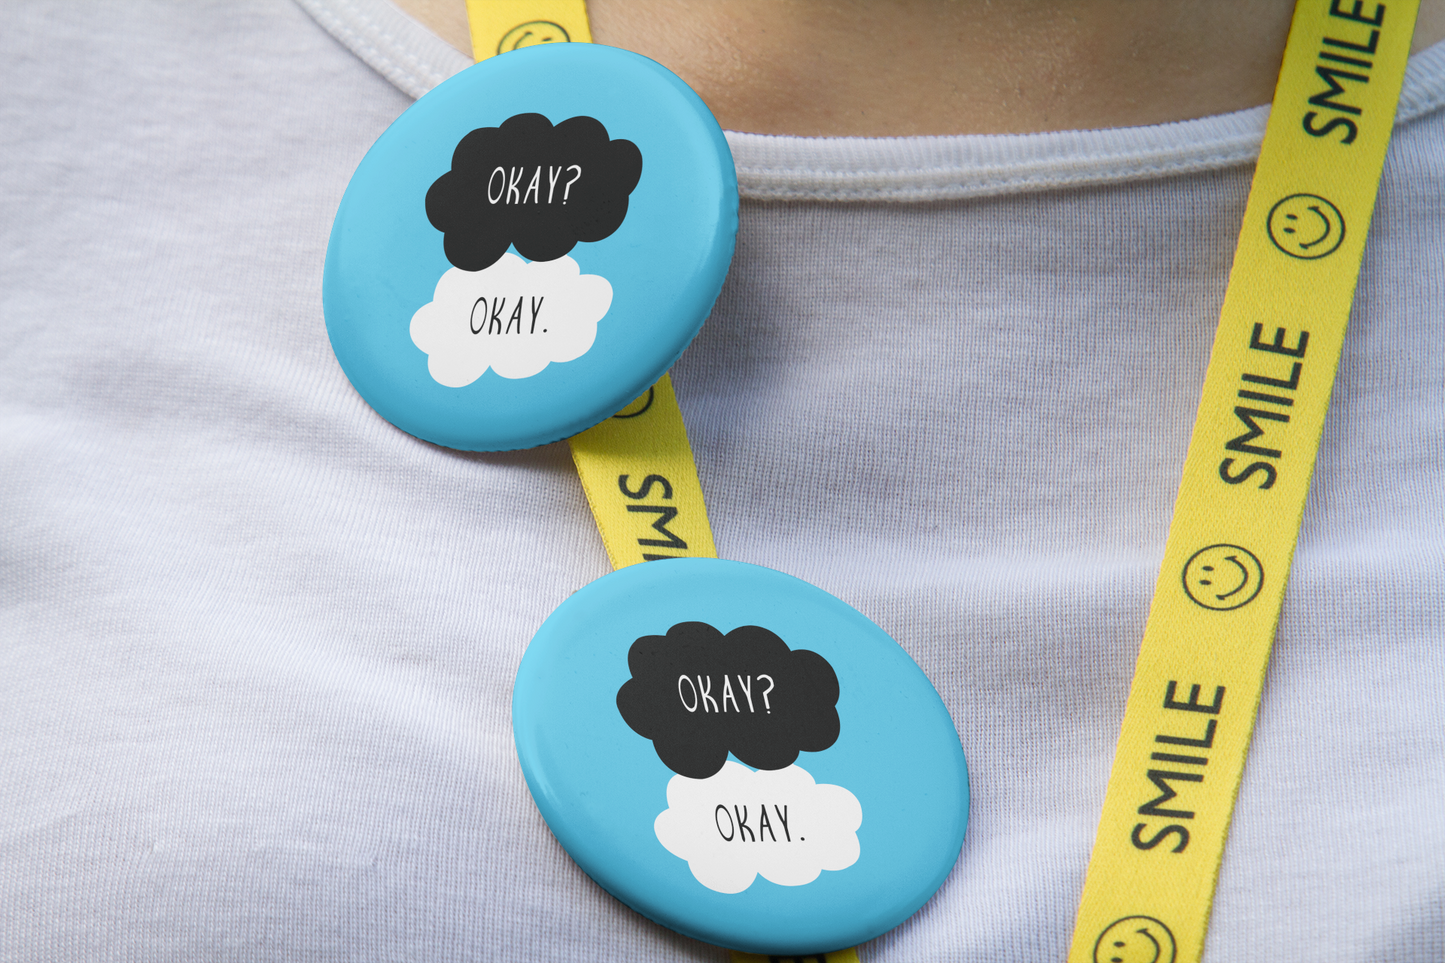 The Fault In Our Stars (TFIOS) - Okay? Okay. Pin Button Badge - Pack of 1